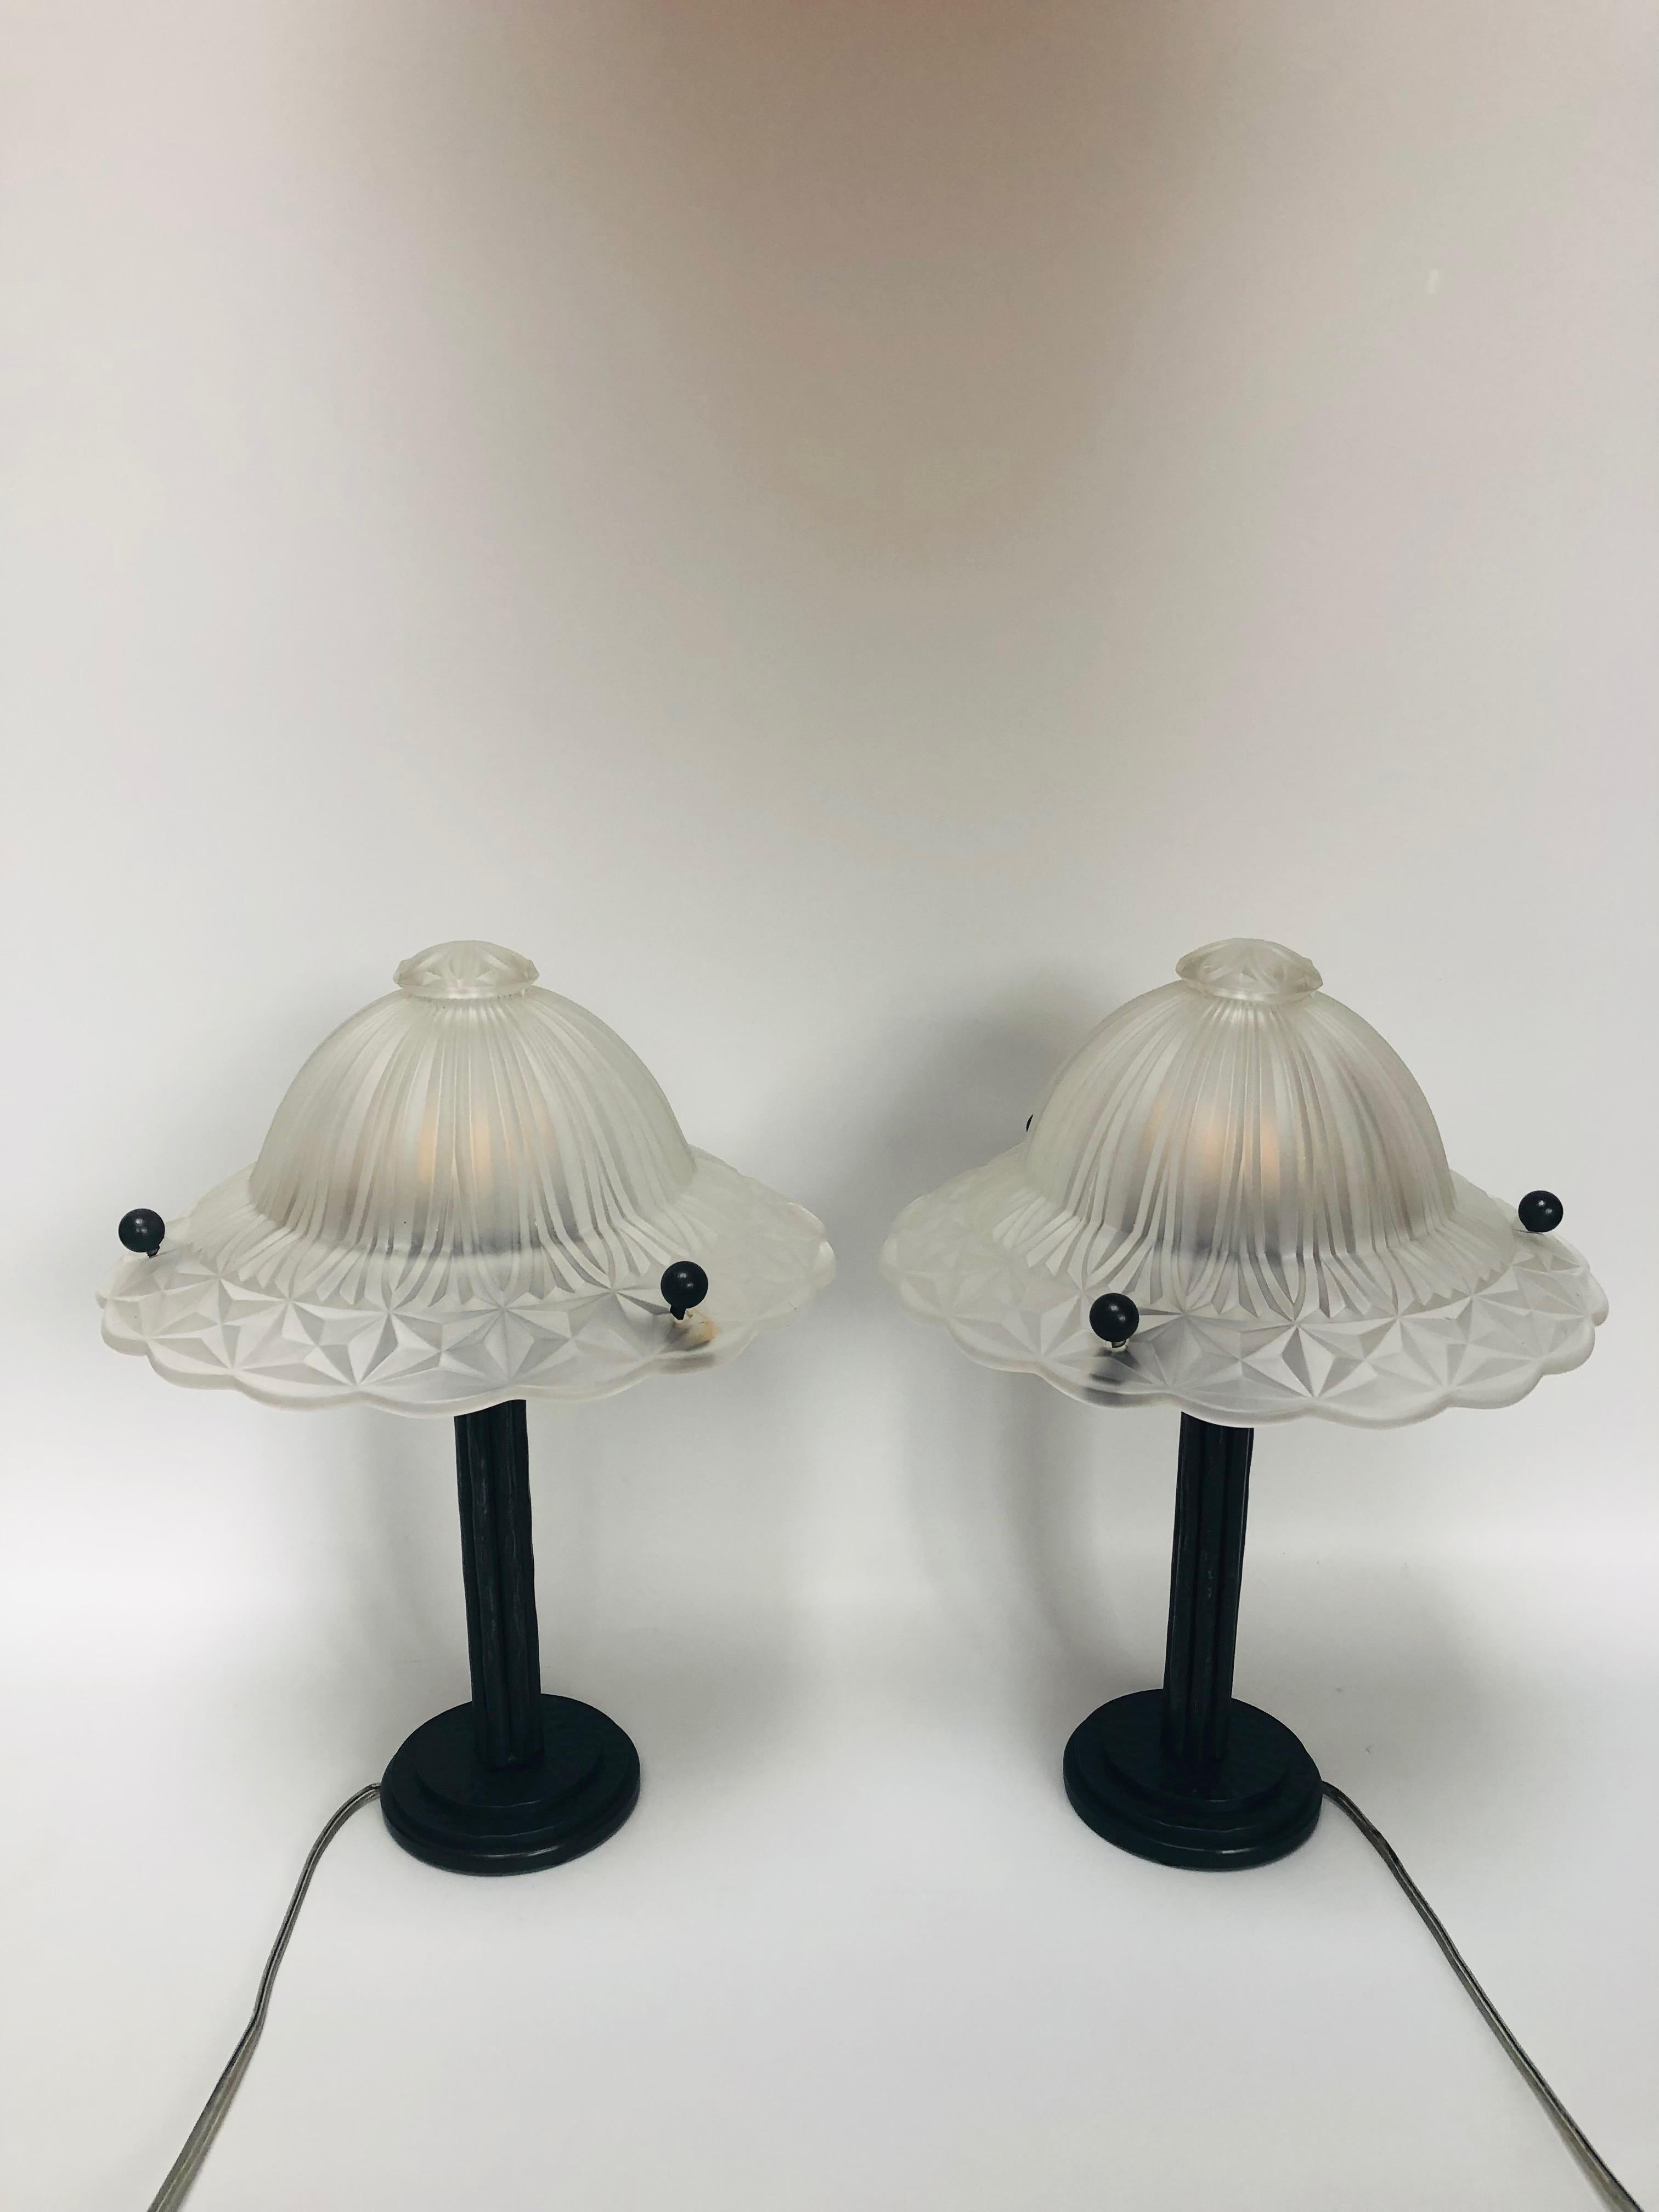 Pair of art deco lamps circa 1930.
Finely hammered forged glass foot.
Molded glass shell with geometric decoration attributed to Georges Leleu.
In perfect condition and electrified.

Base diameter: 10 cm
Shell Diameter: 25.5 cm
Height: